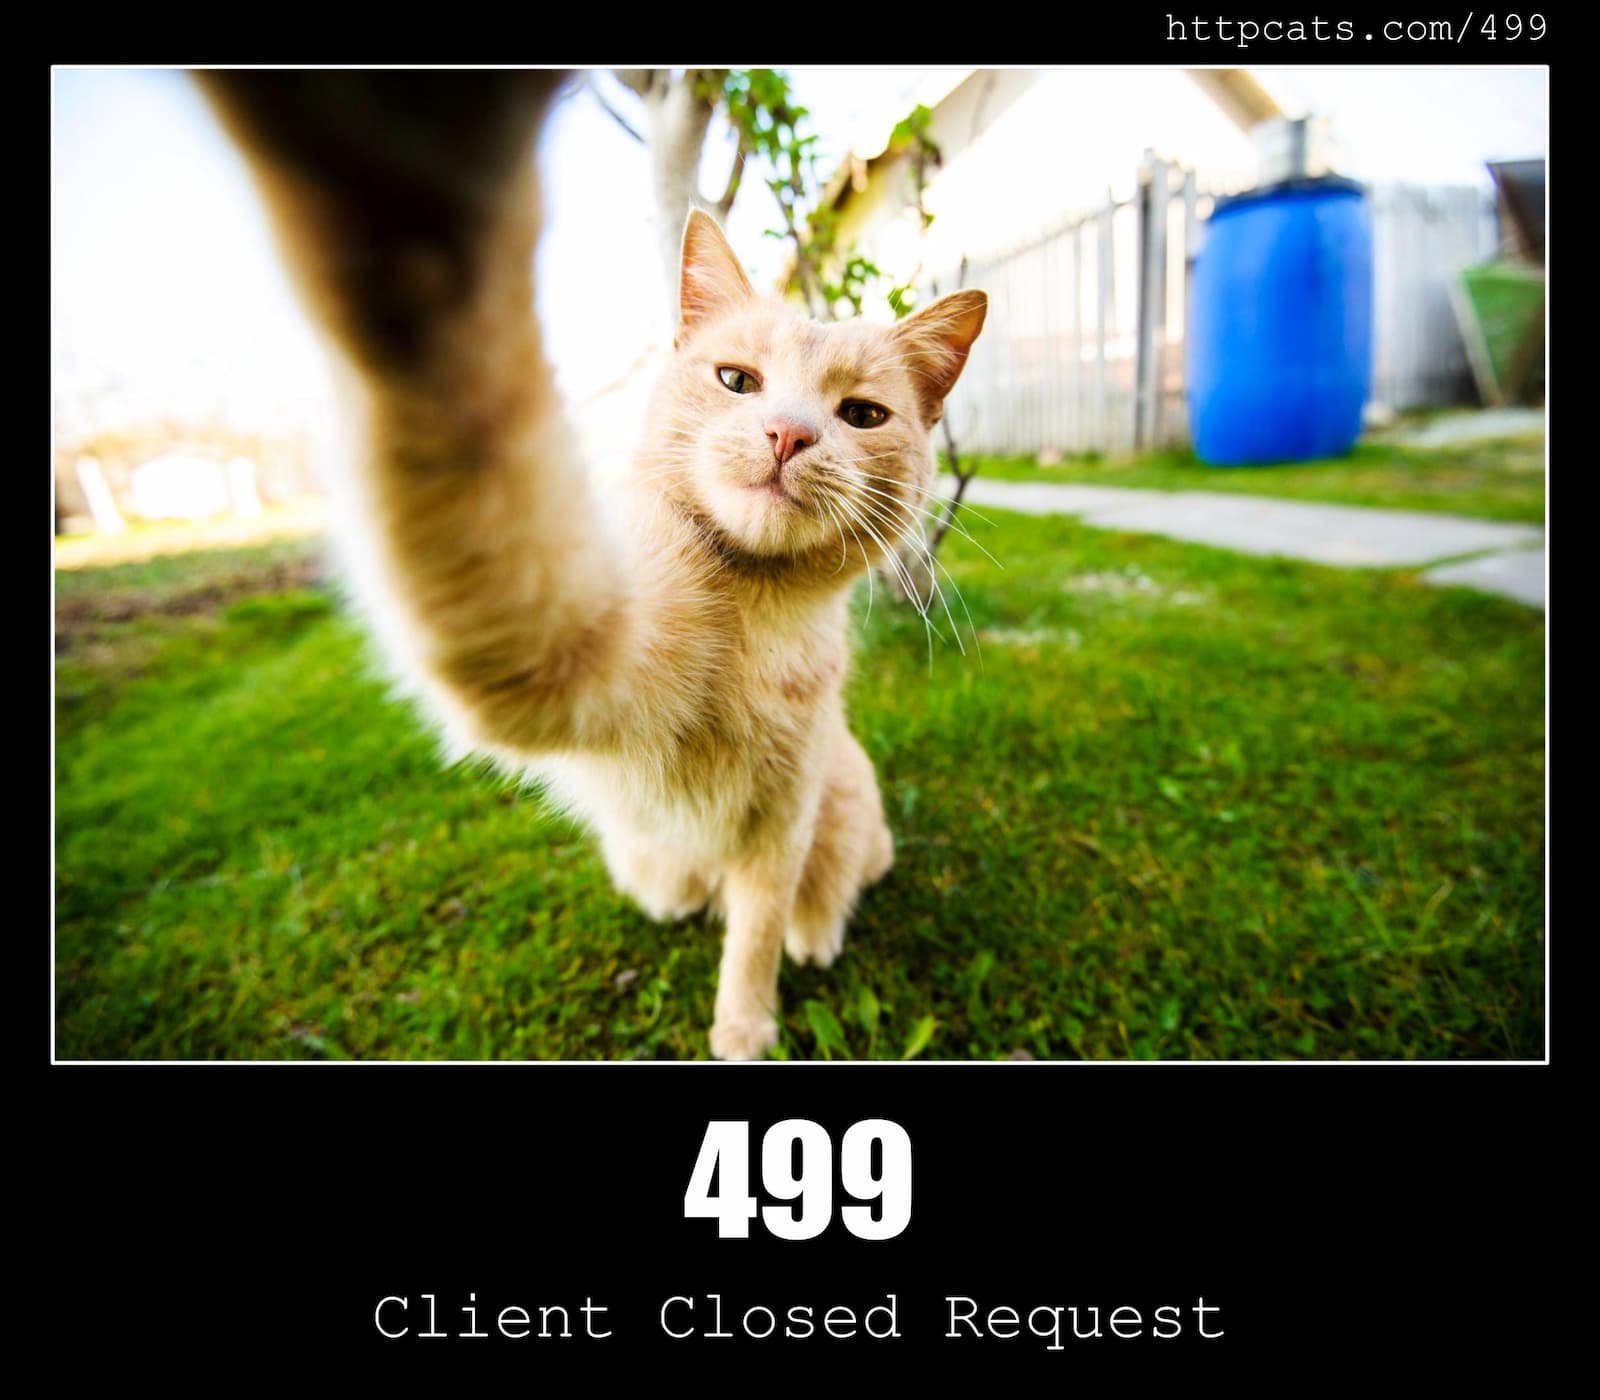 HTTP Status Code 499 Client Closed Request & Cats